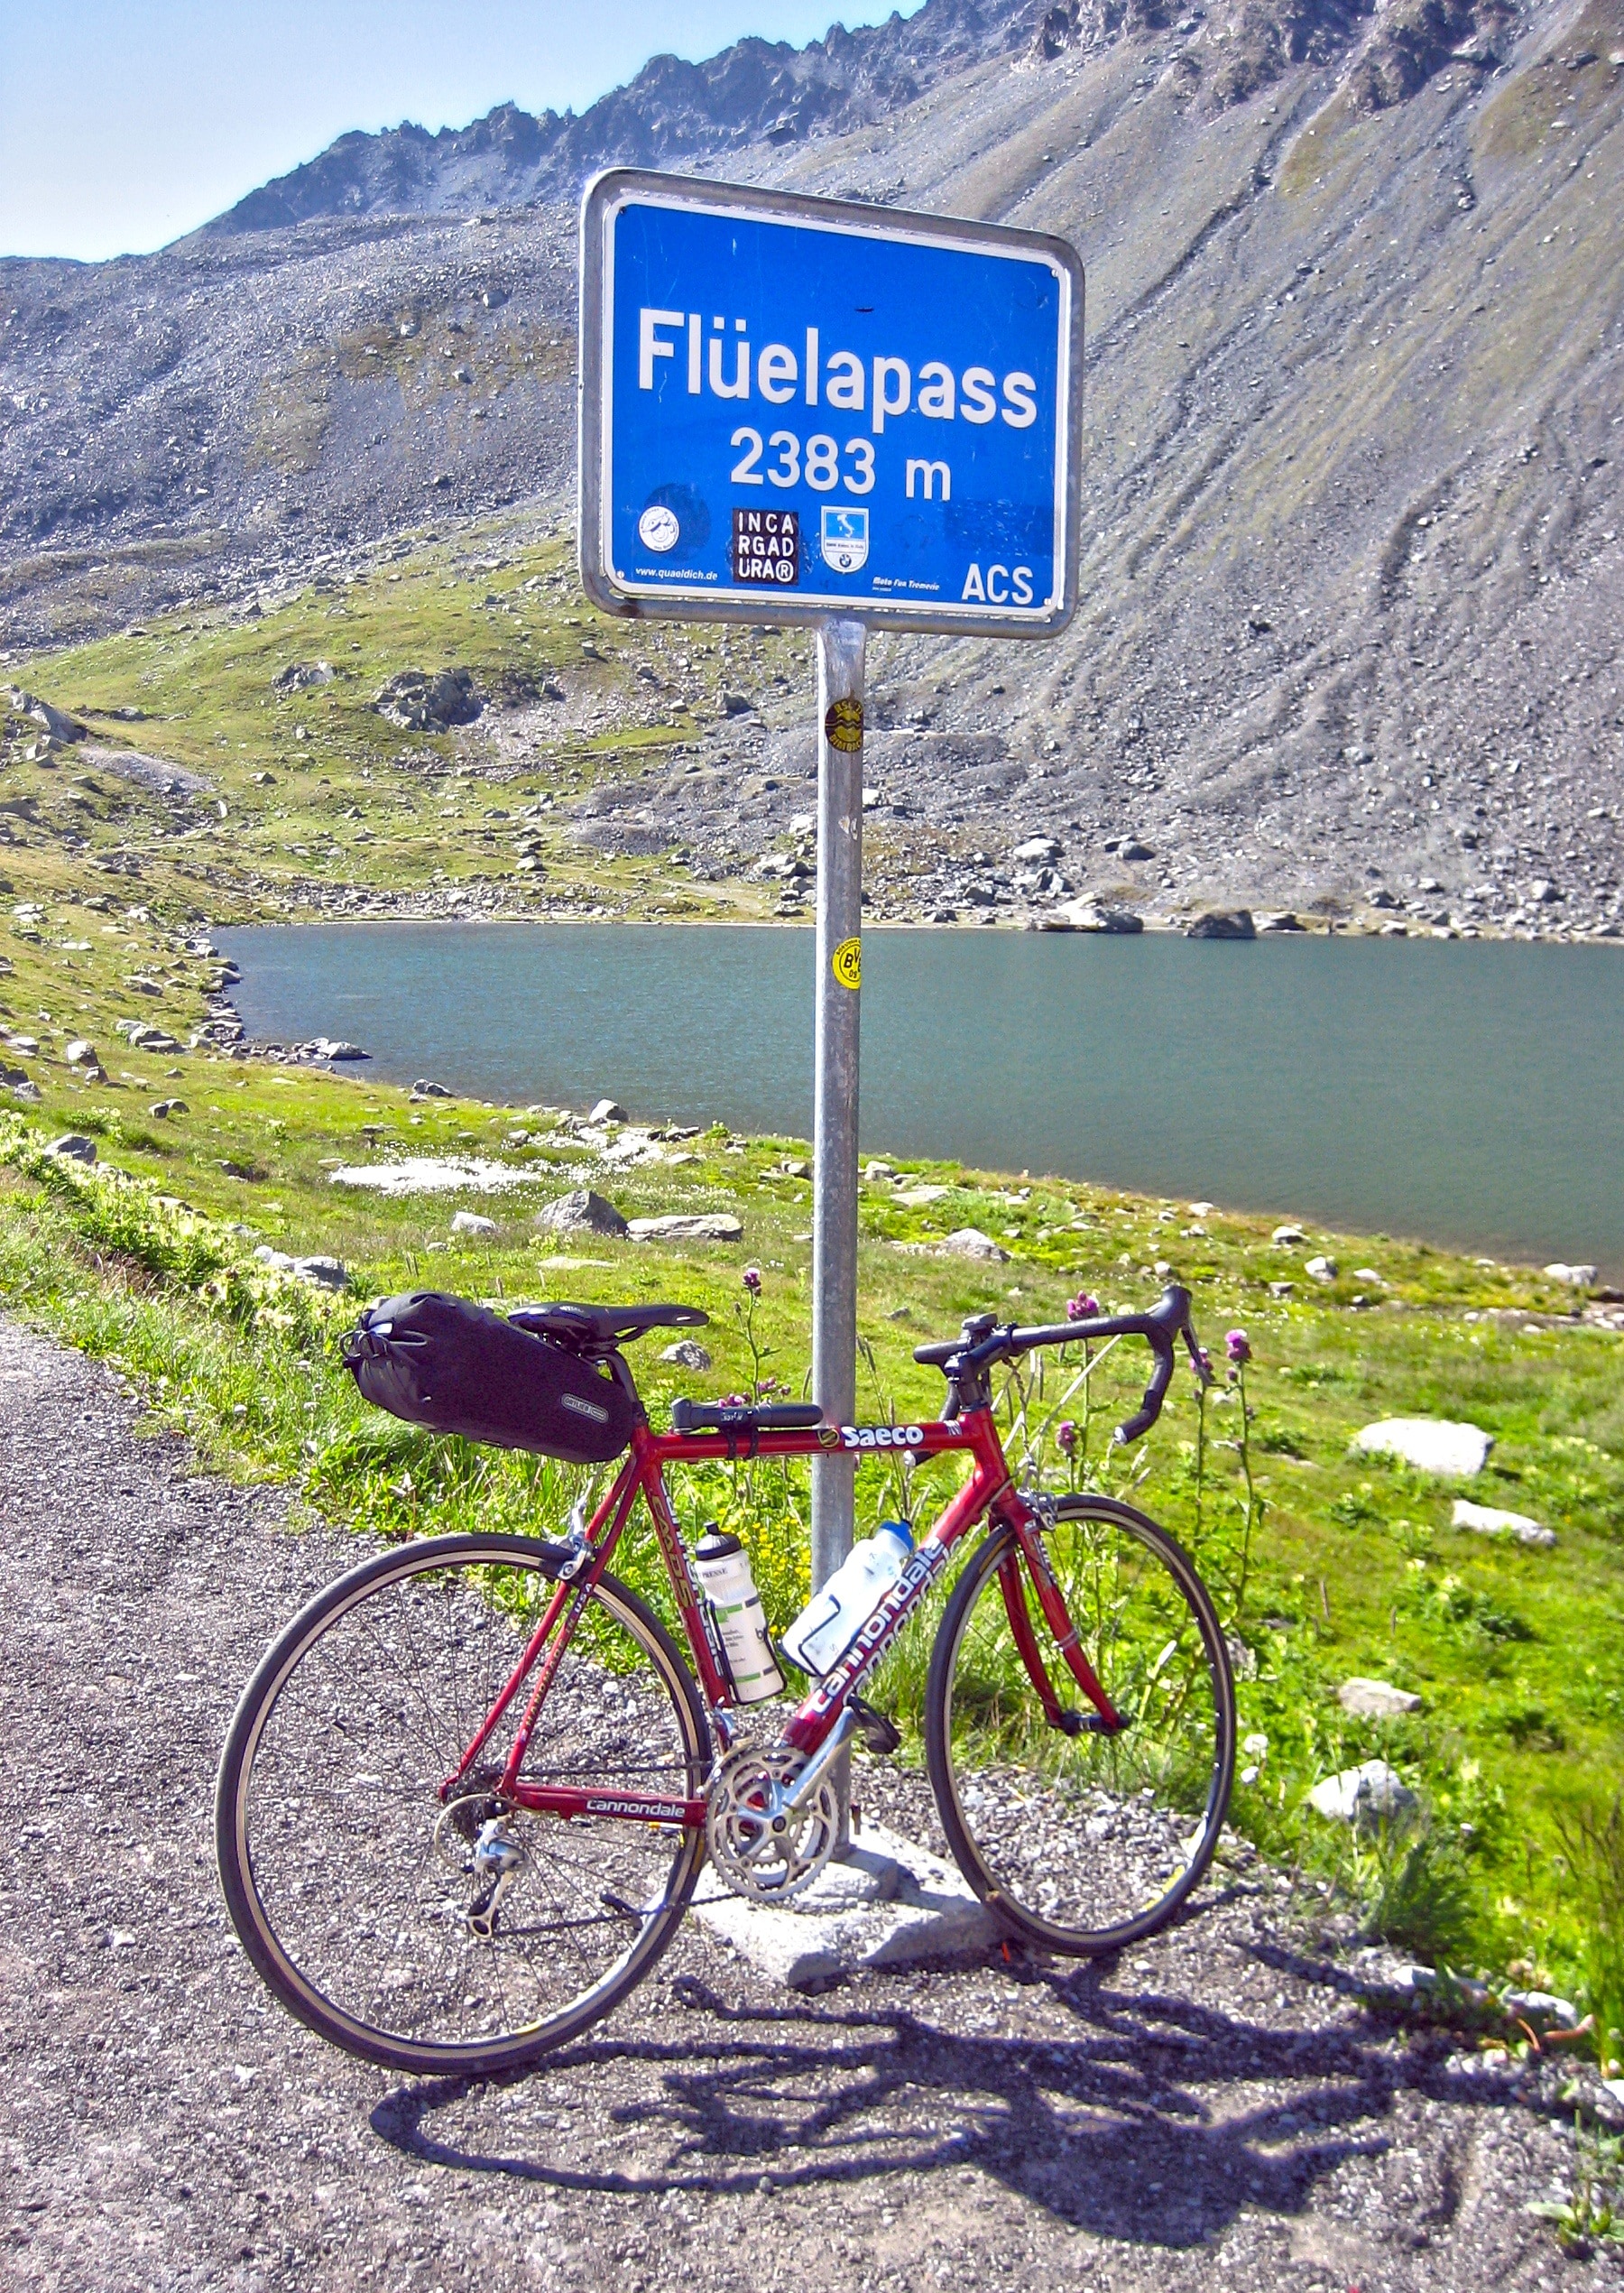 black and red road bike leaning on grey and blue Fluelapass signage near body of water